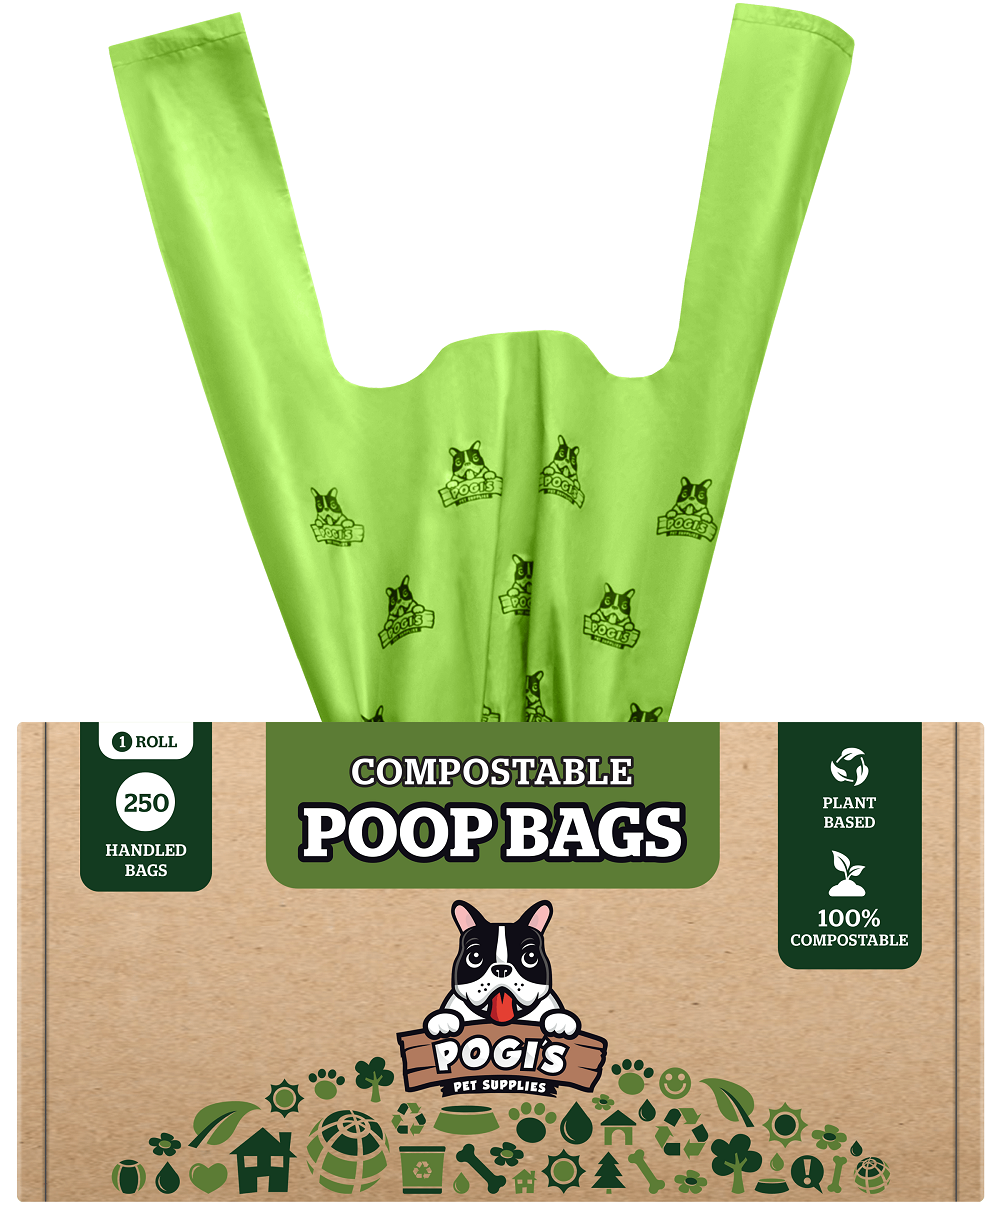 These Biodegradable Dog Poop Bags Are For Environmentally Conscious Pet Parents